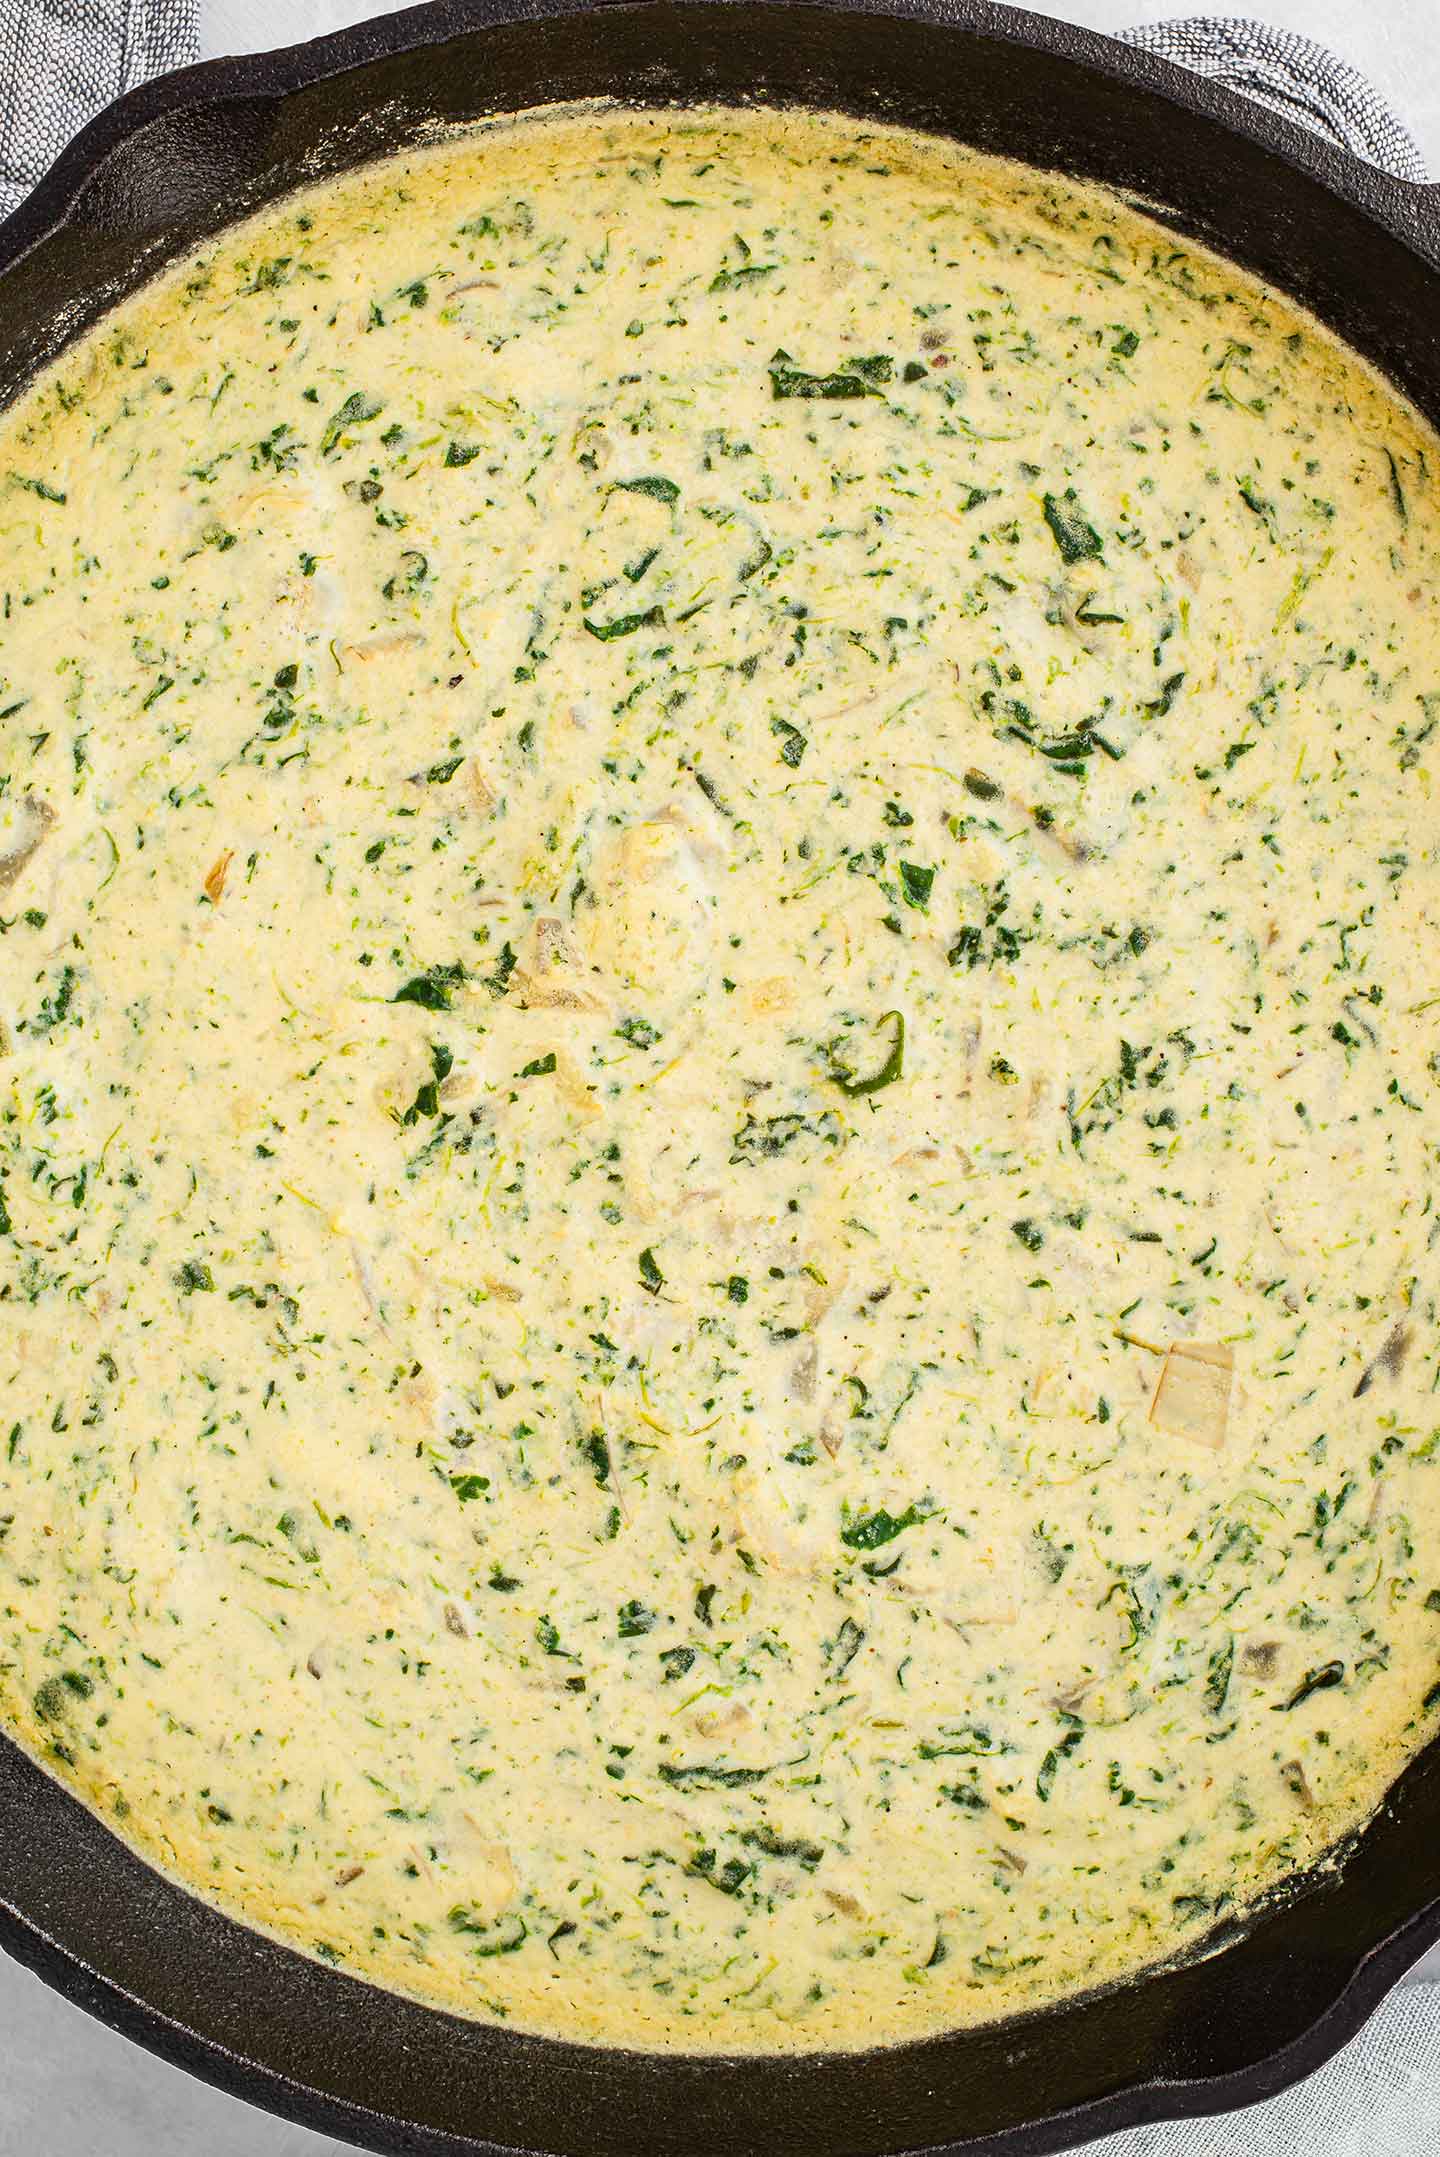 Top down view of a cast iron skillet filled with spinach white bean dip. The dip is lightly browned on top and warm from the oven.